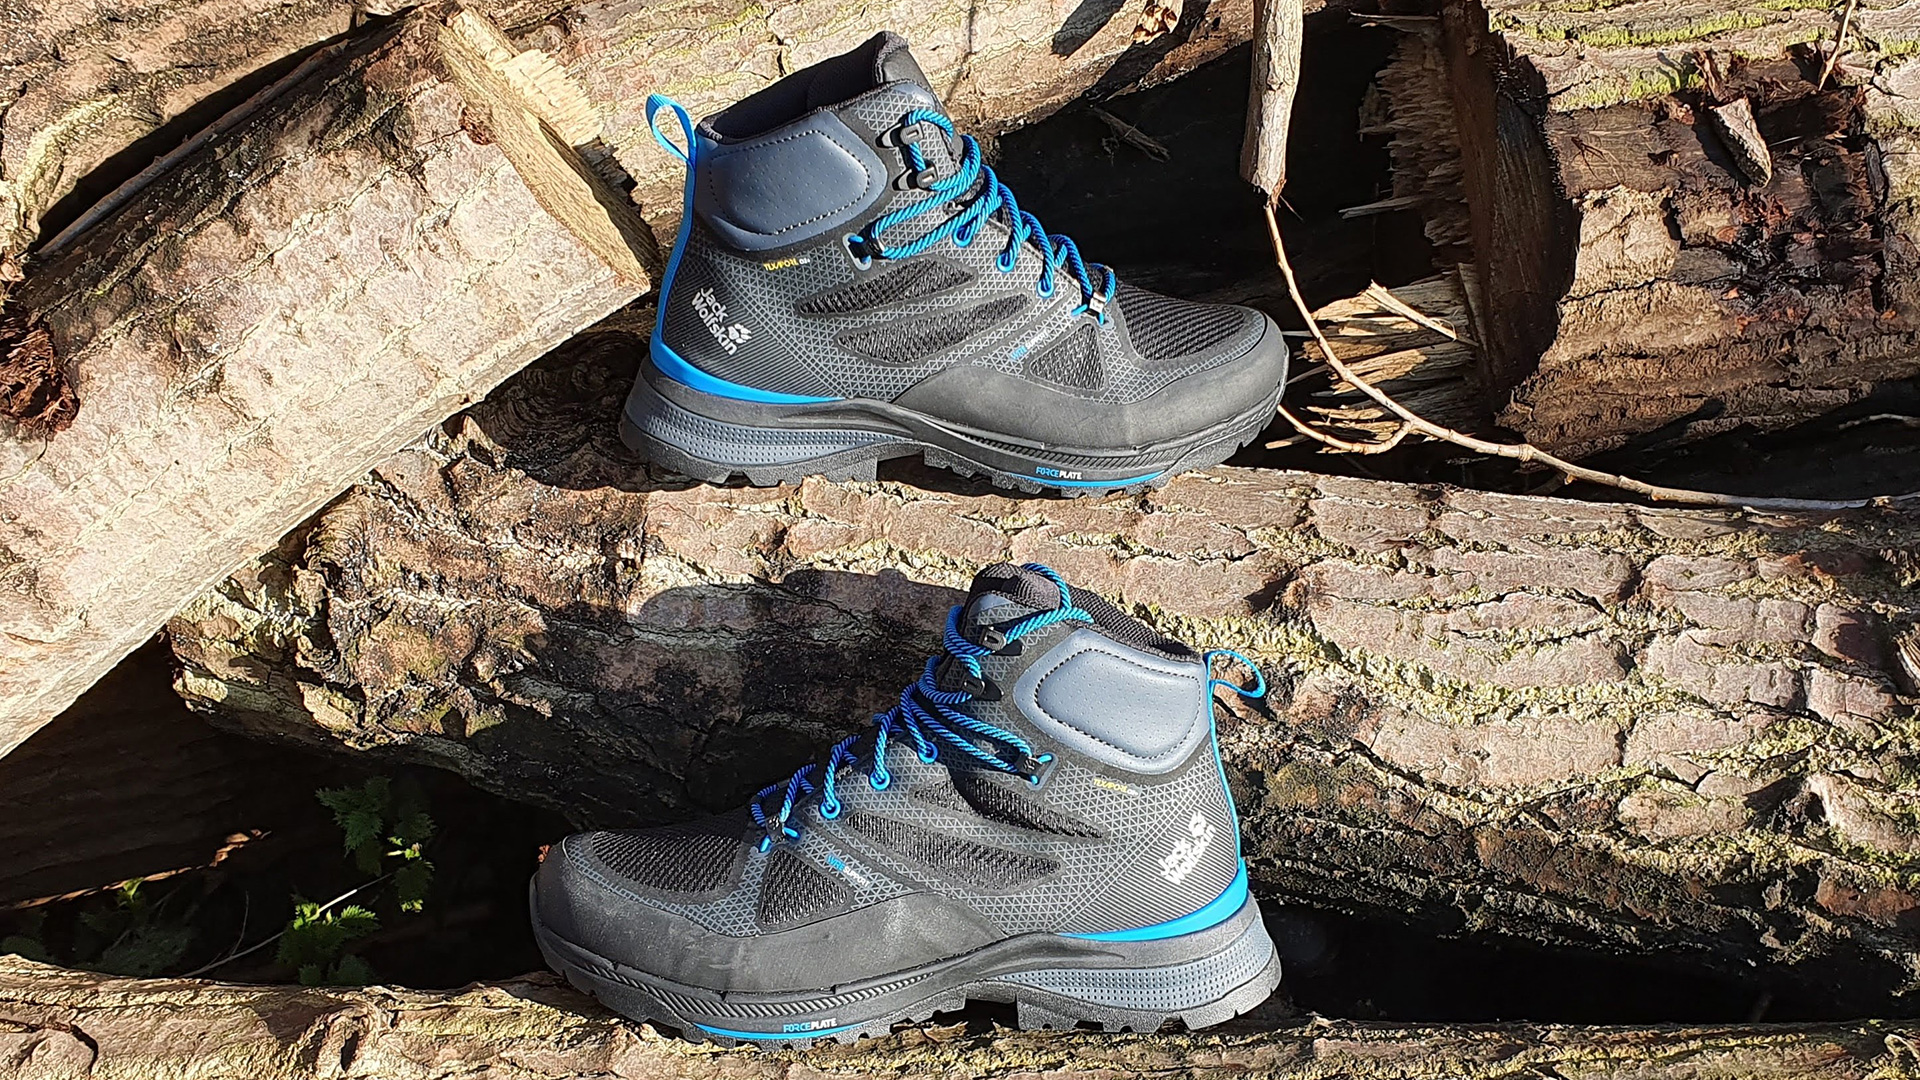 Jack Wolfskin Texapore T3 Force review boot | hiking Striker